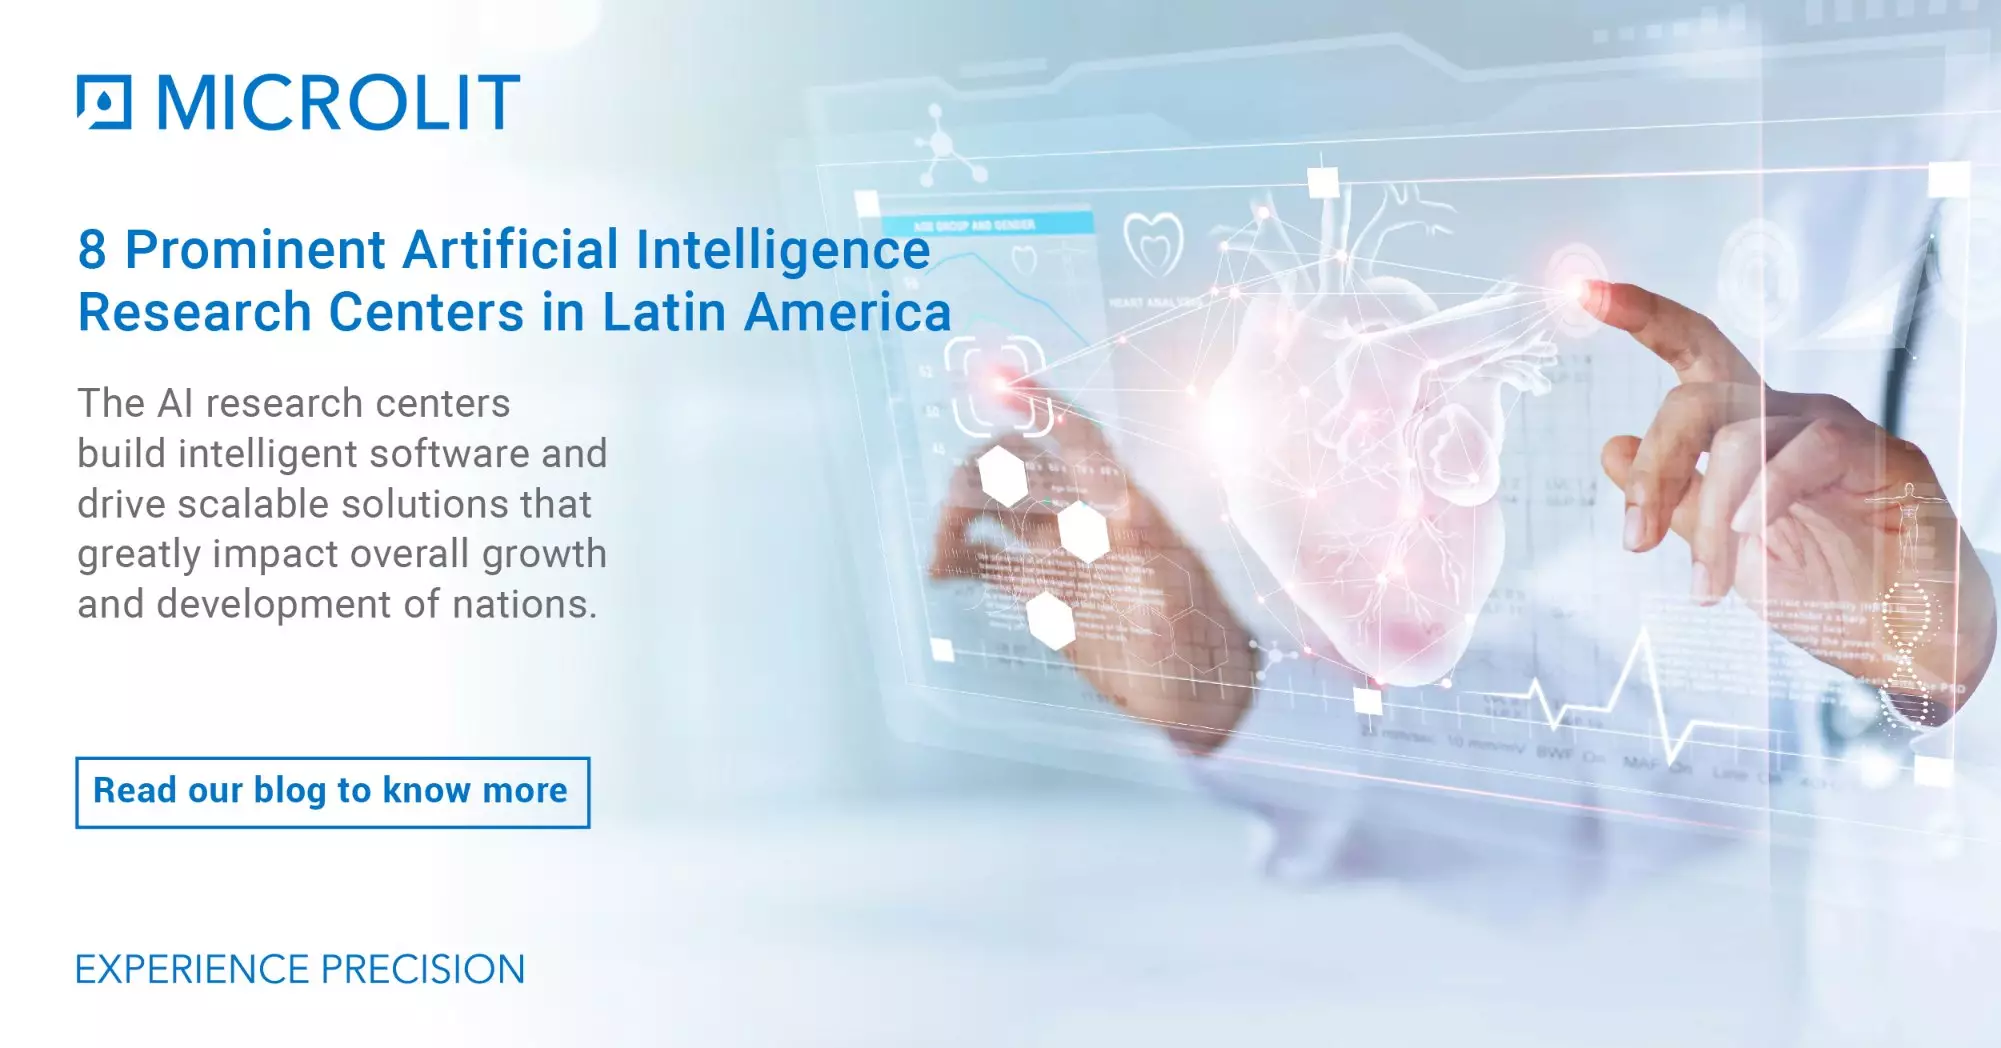 8 Prominent Artificial Intelligence Research Centers in Latin America